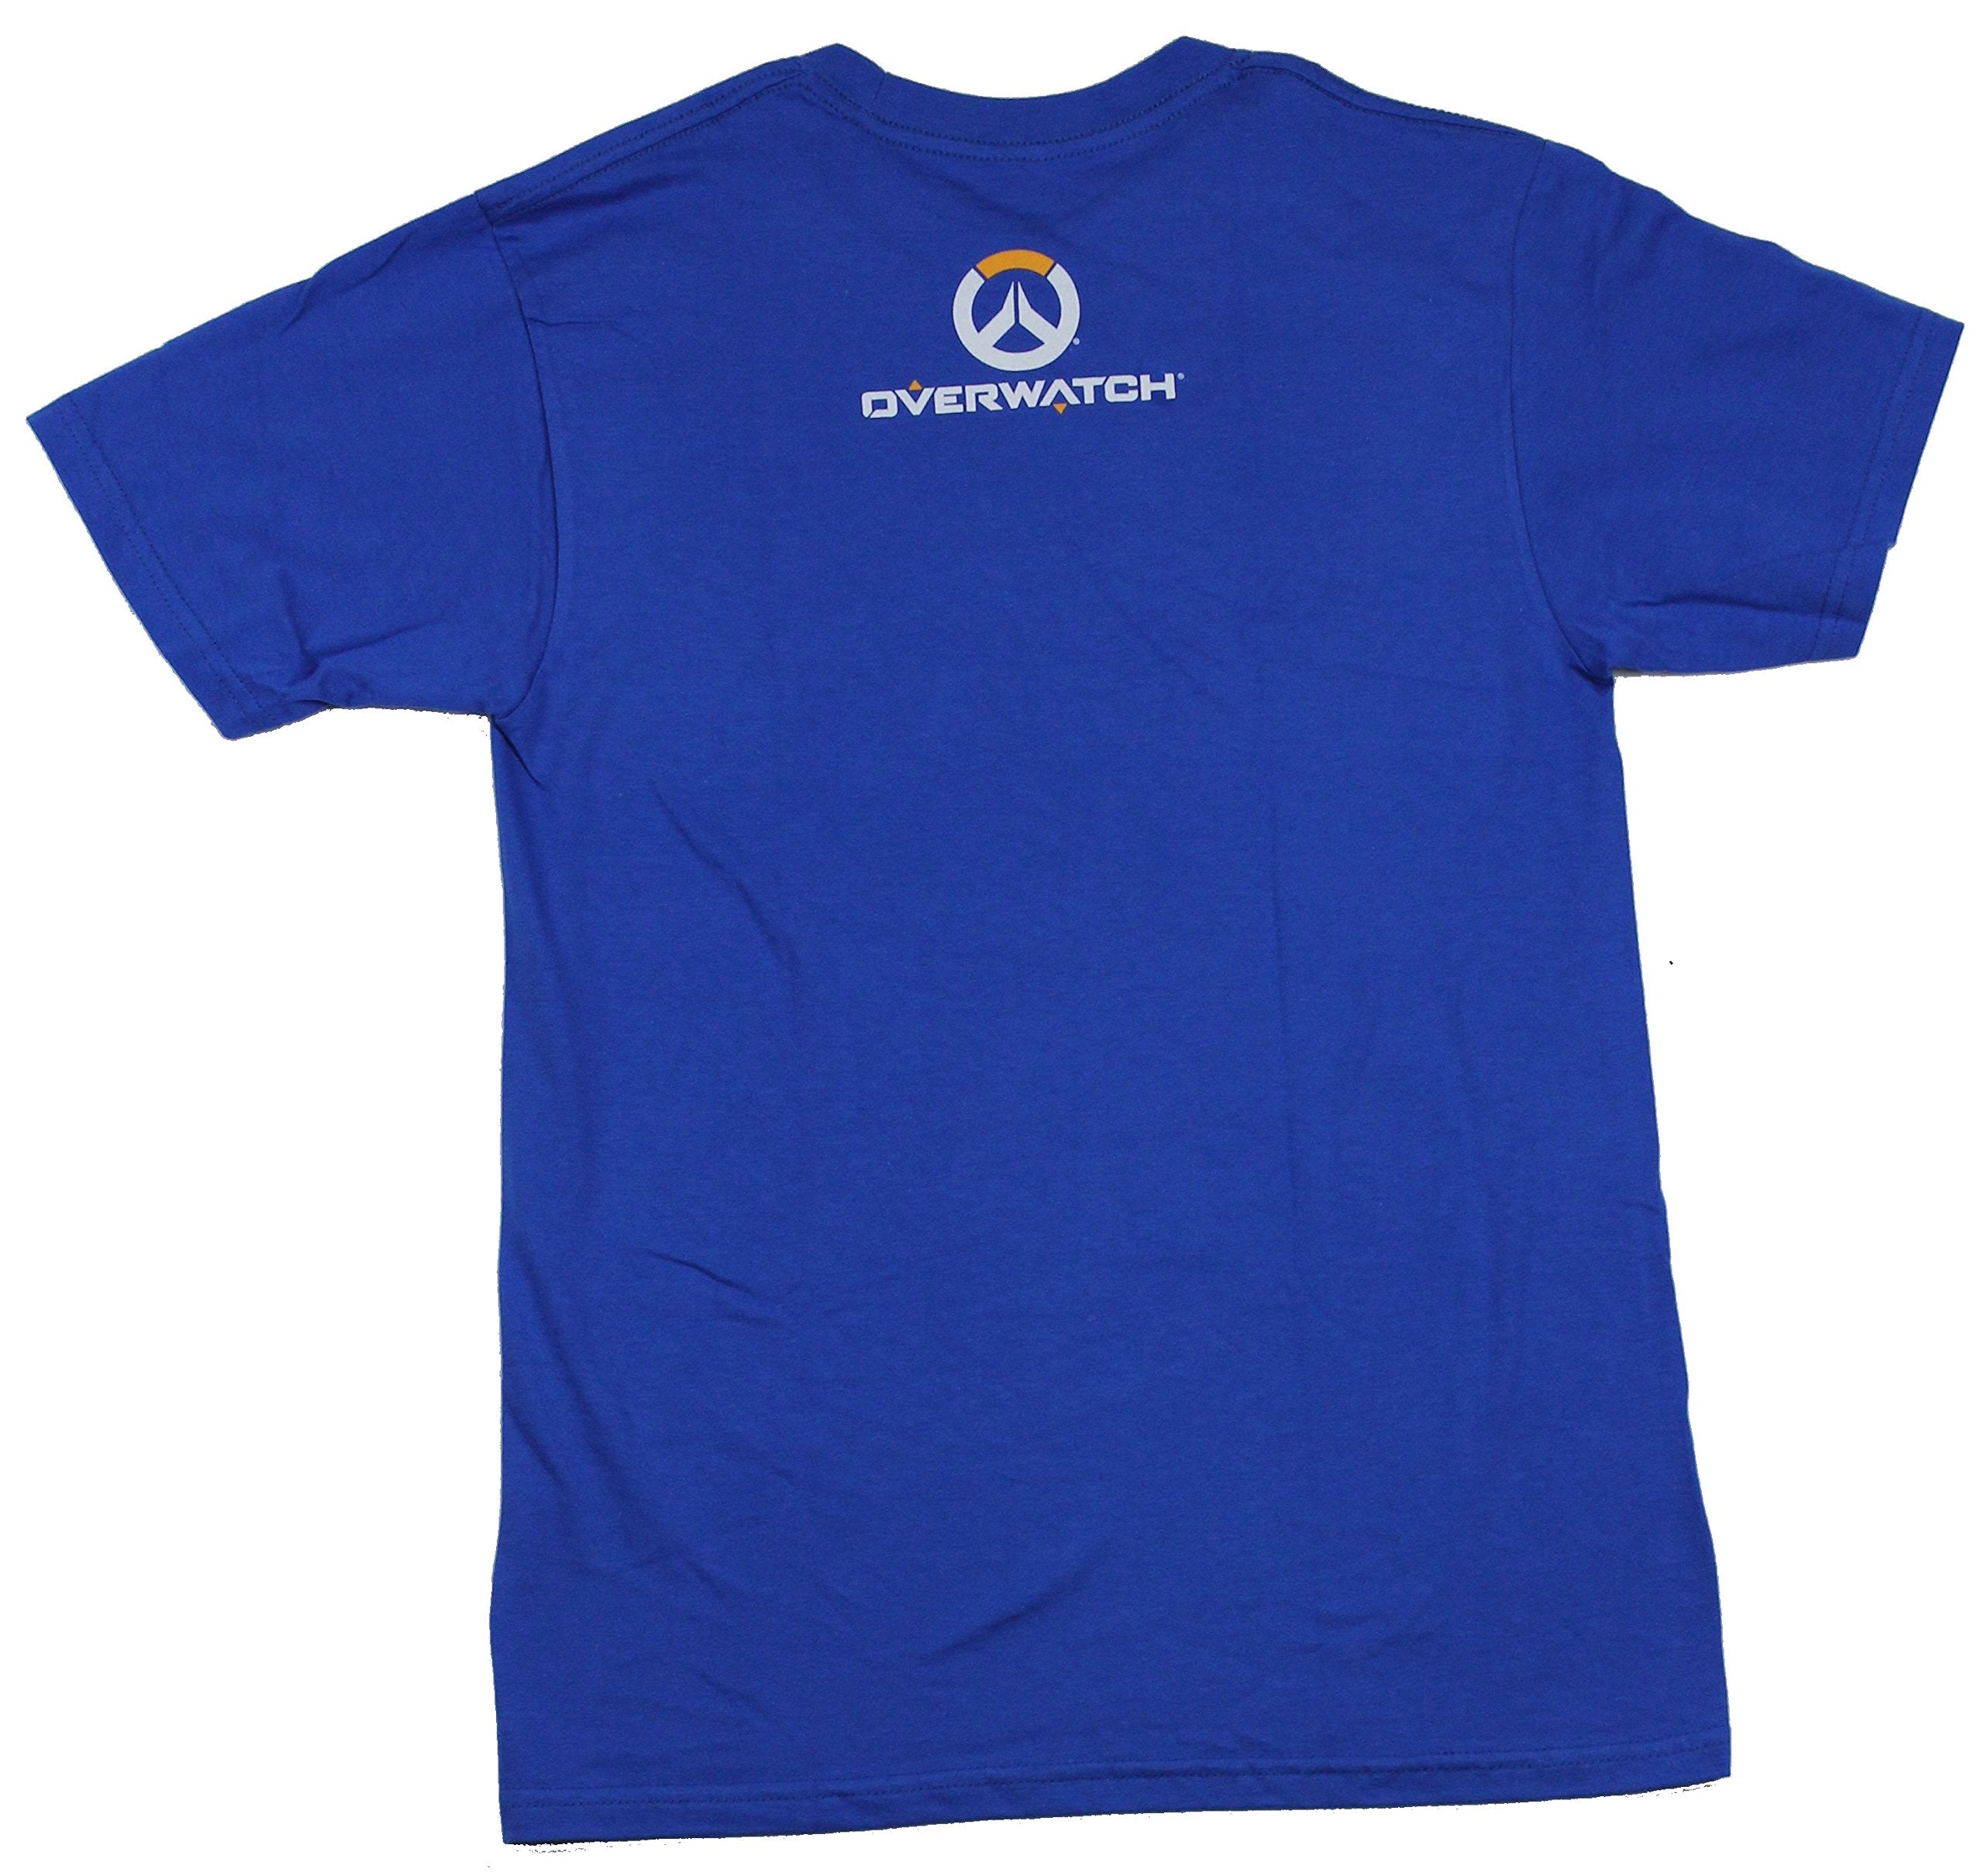 Overwatch Mens T-Shirt - Classic Solider 76 Numer Logo